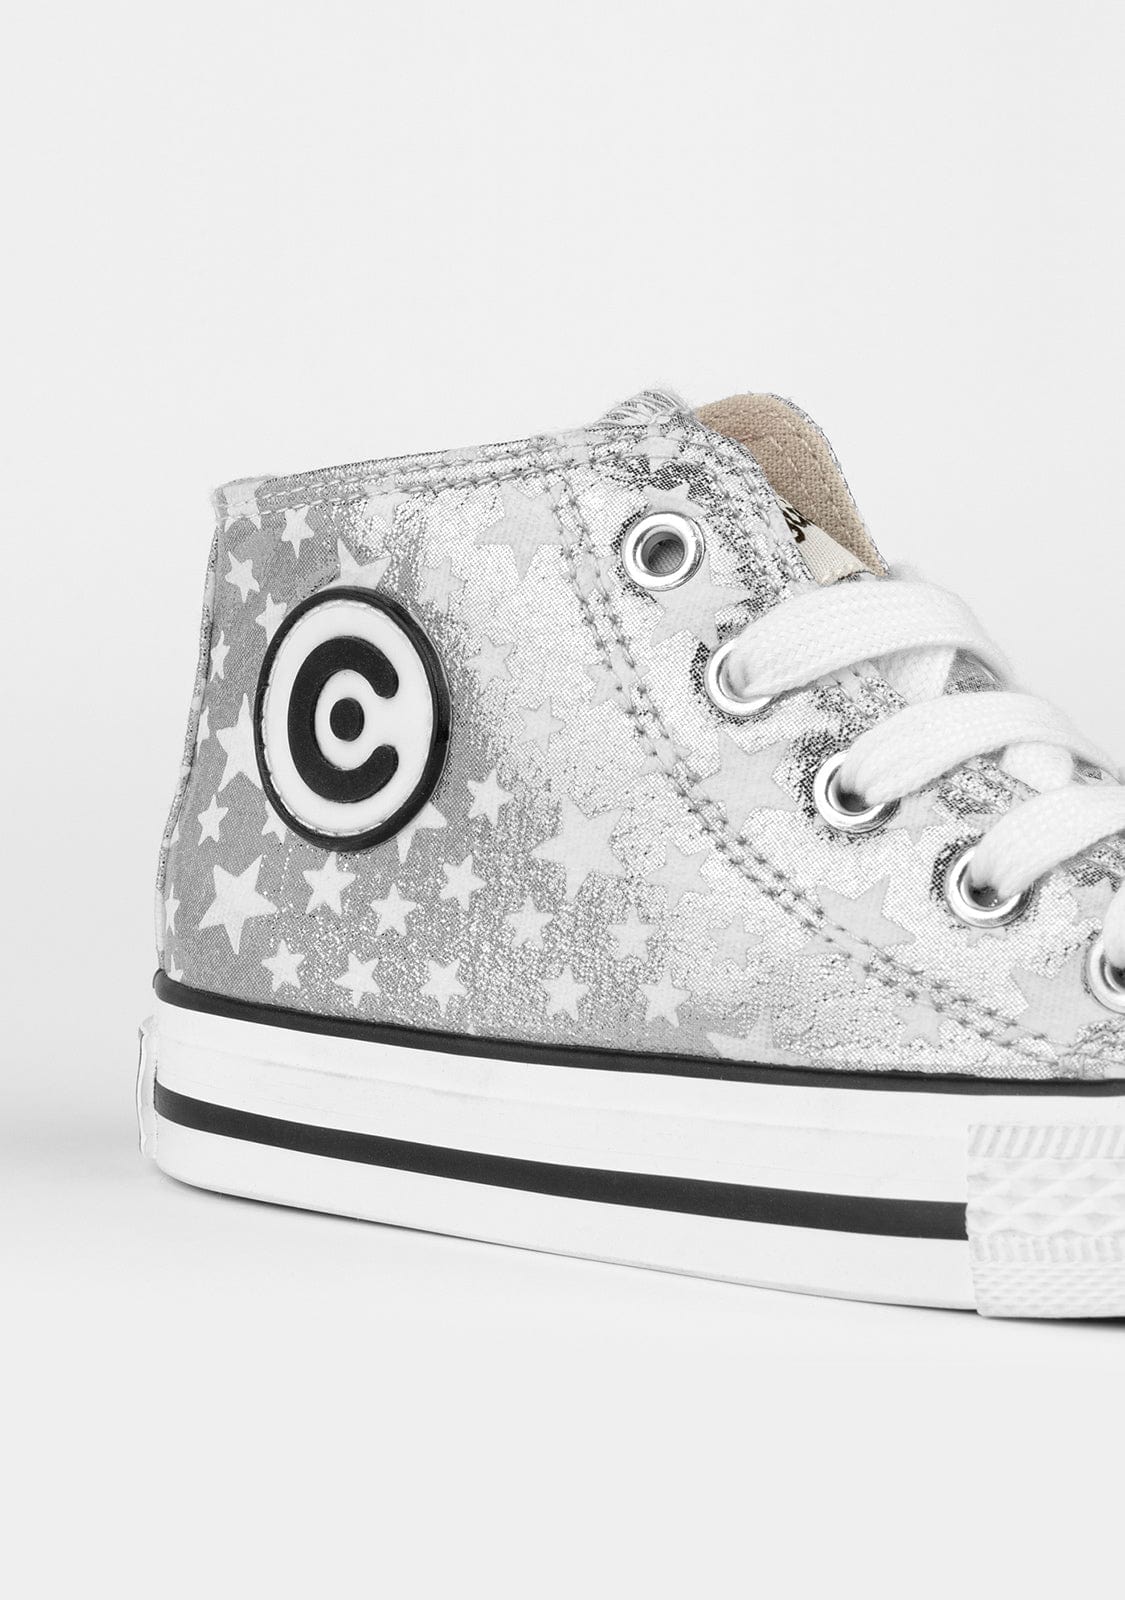 CONGUITOS Shoes Unisex Silver Glows in the Dark Hi-Top Sneakers